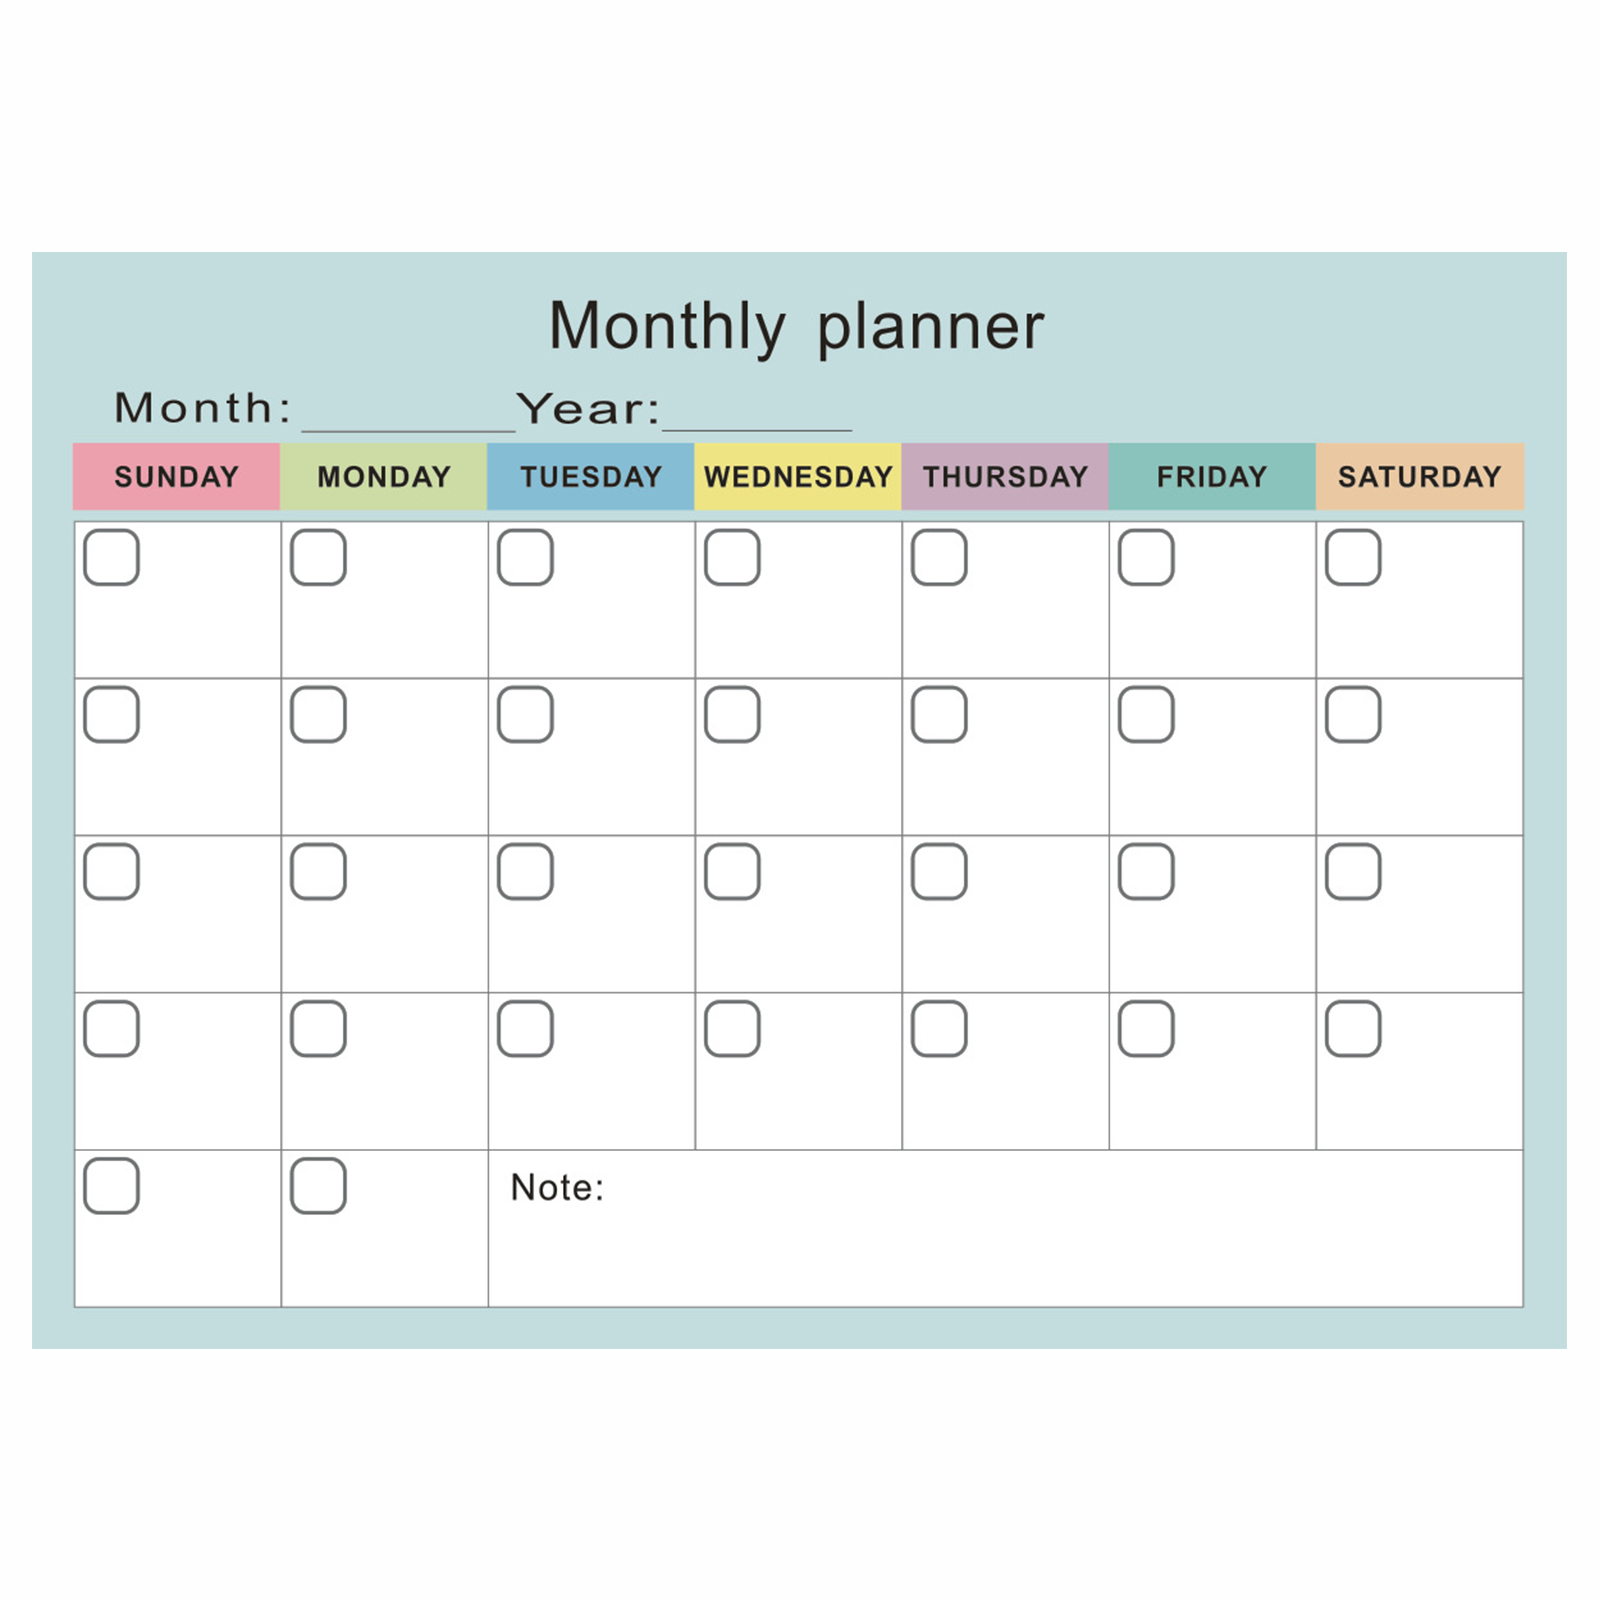 Weekly Monthly Planner Universal Magnet White Board Easy Clean Office Home Write Smooth Refrigerator Bulletin Kitchen Drawing